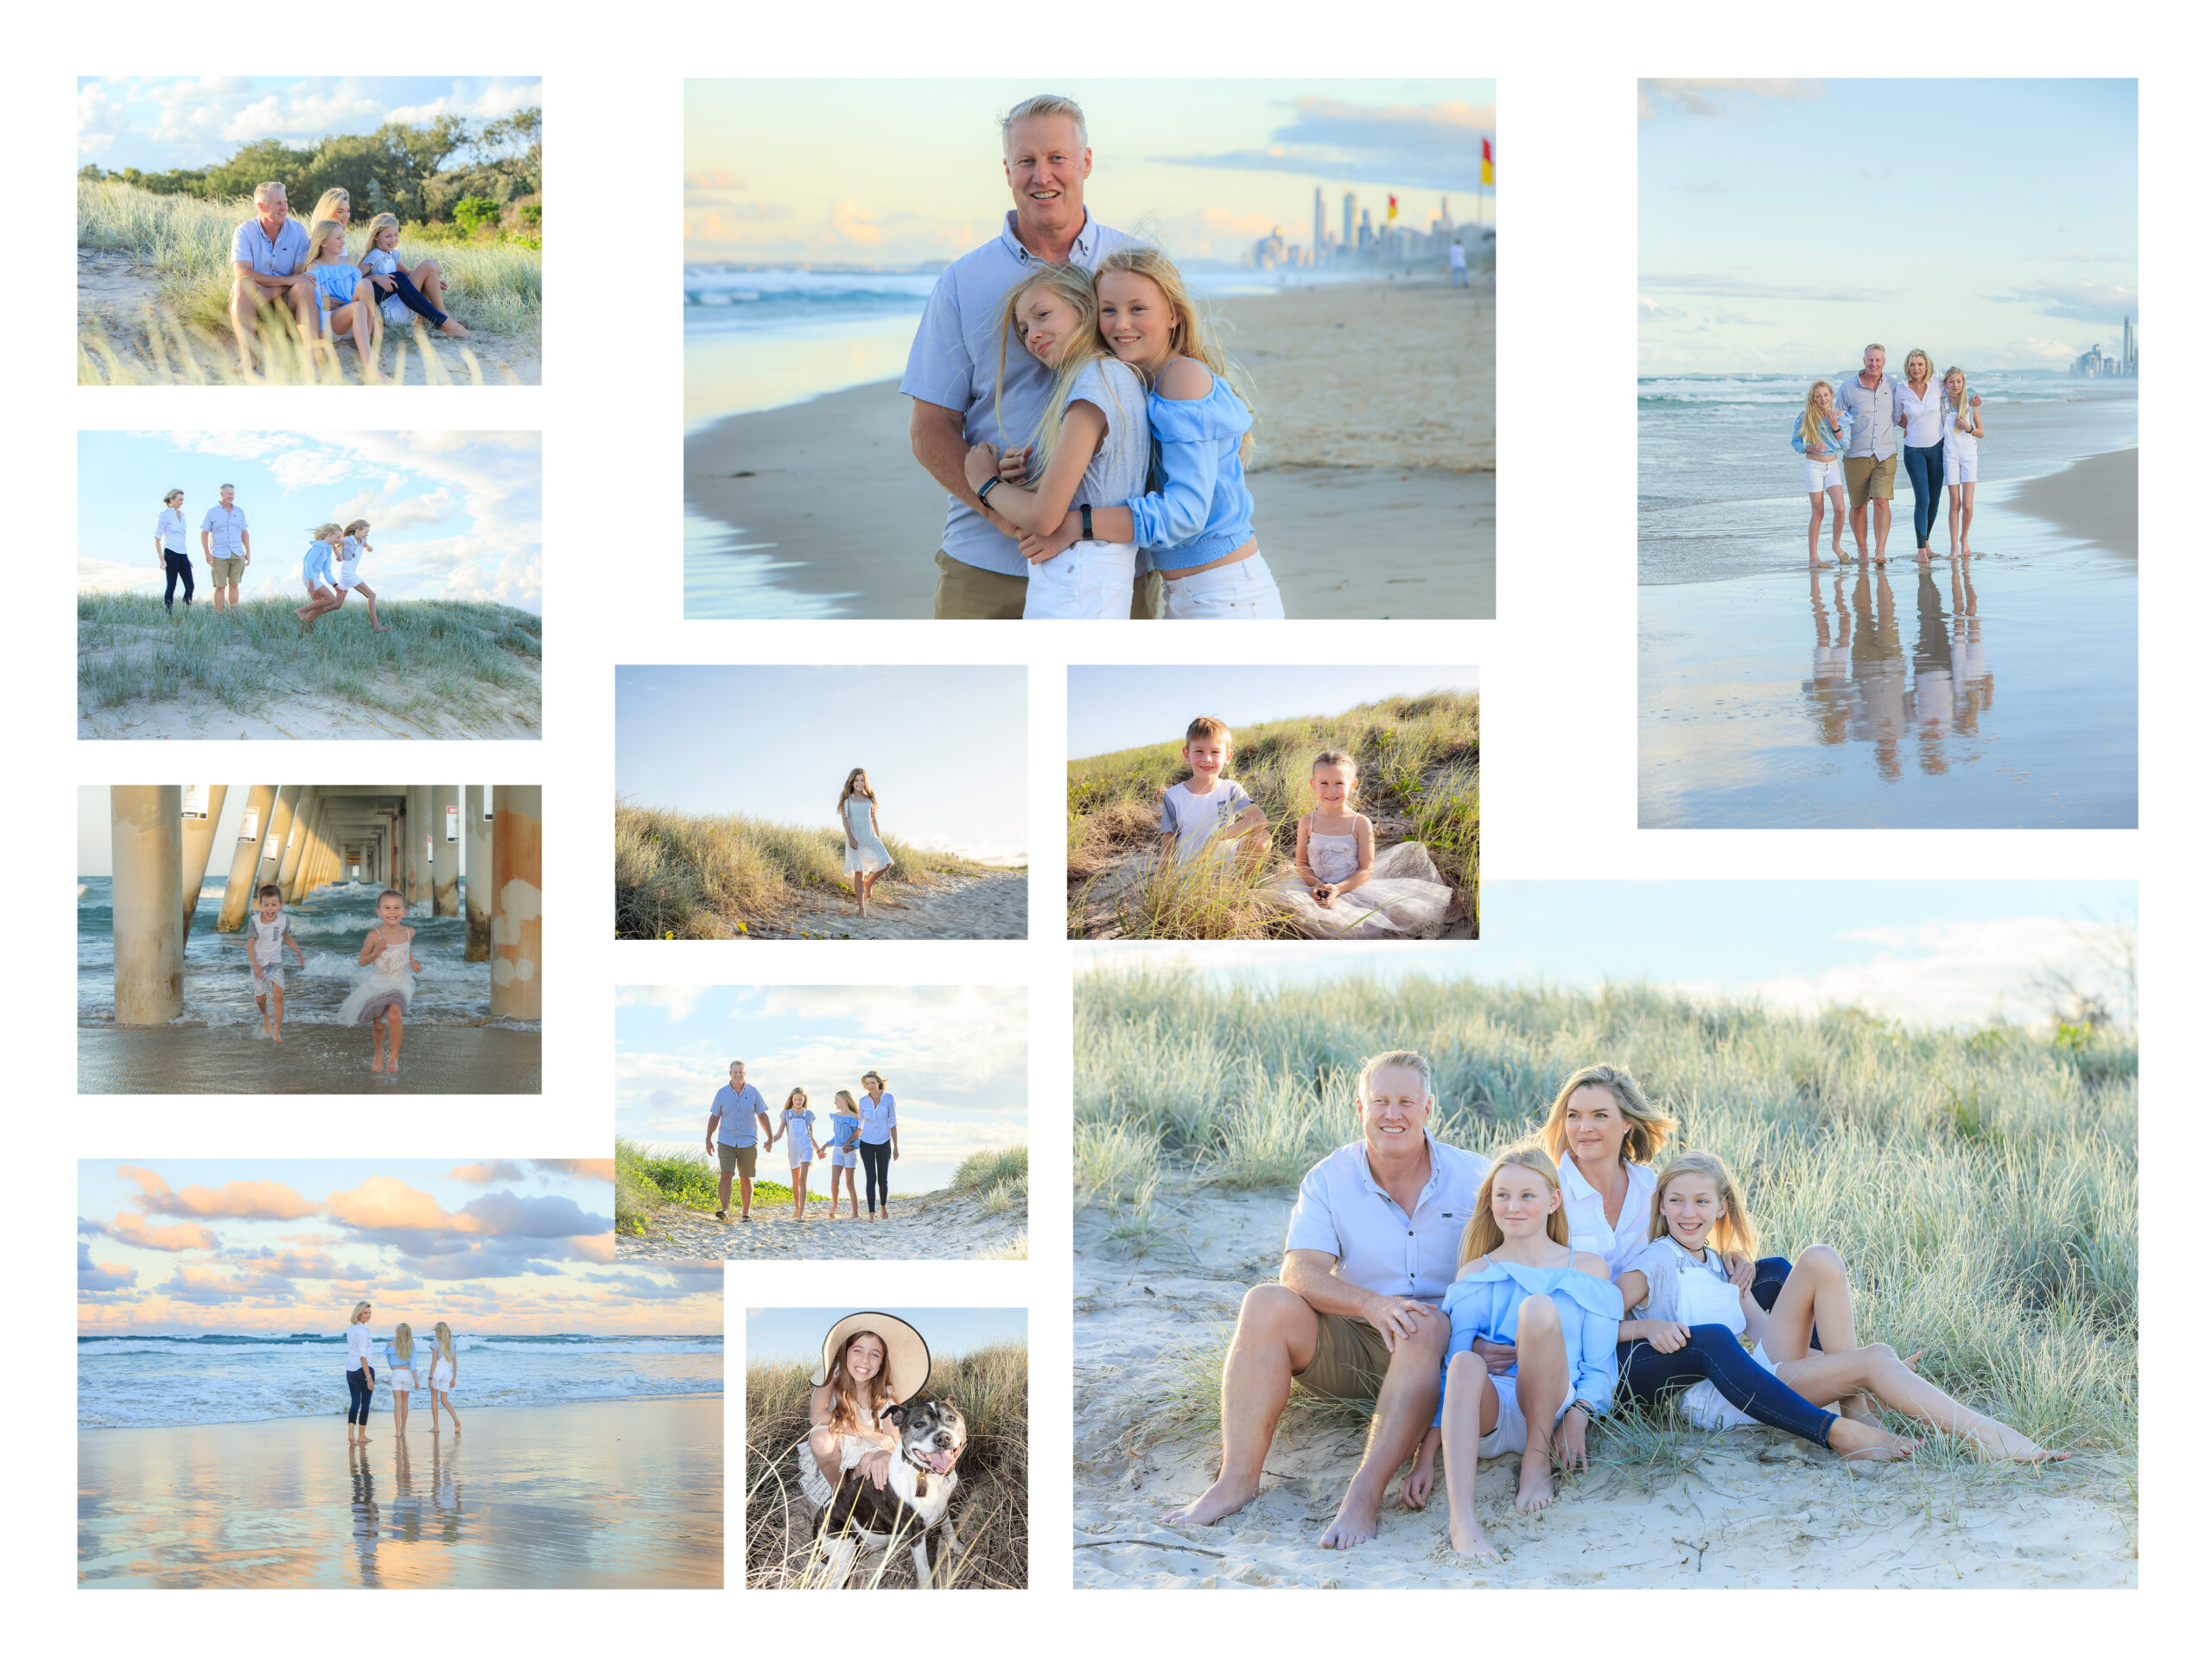 Images from a family photoshoot